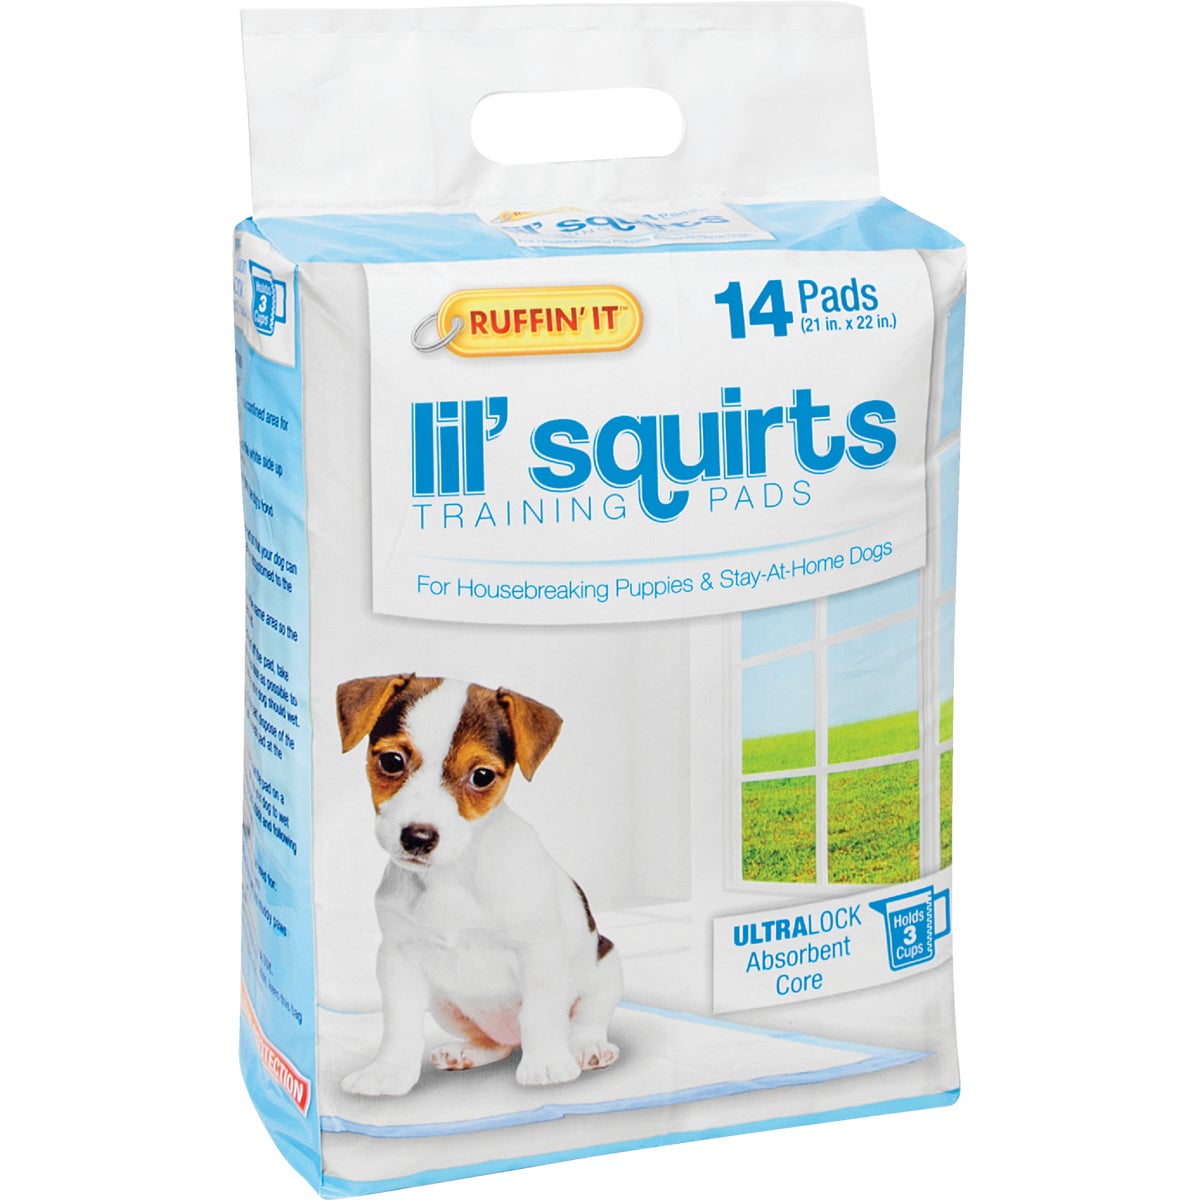 Ruffin' it Lil' Squirts 22 In. x 22 In. Puppy Training Pads (14-Pack)